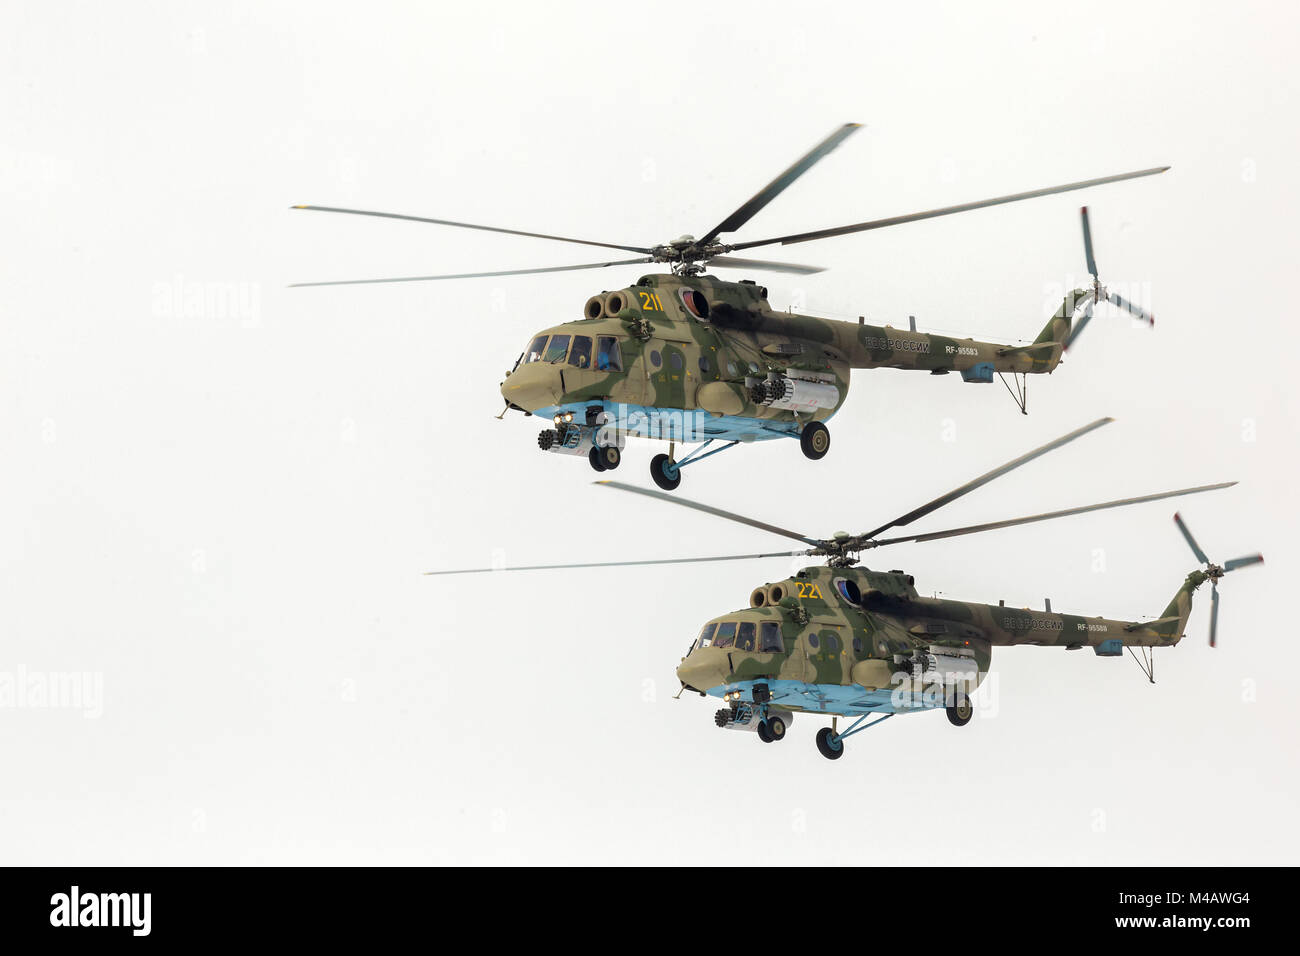 Mi-8 helicopter participant Airshow. NATO reporting name: Hip Stock Photo